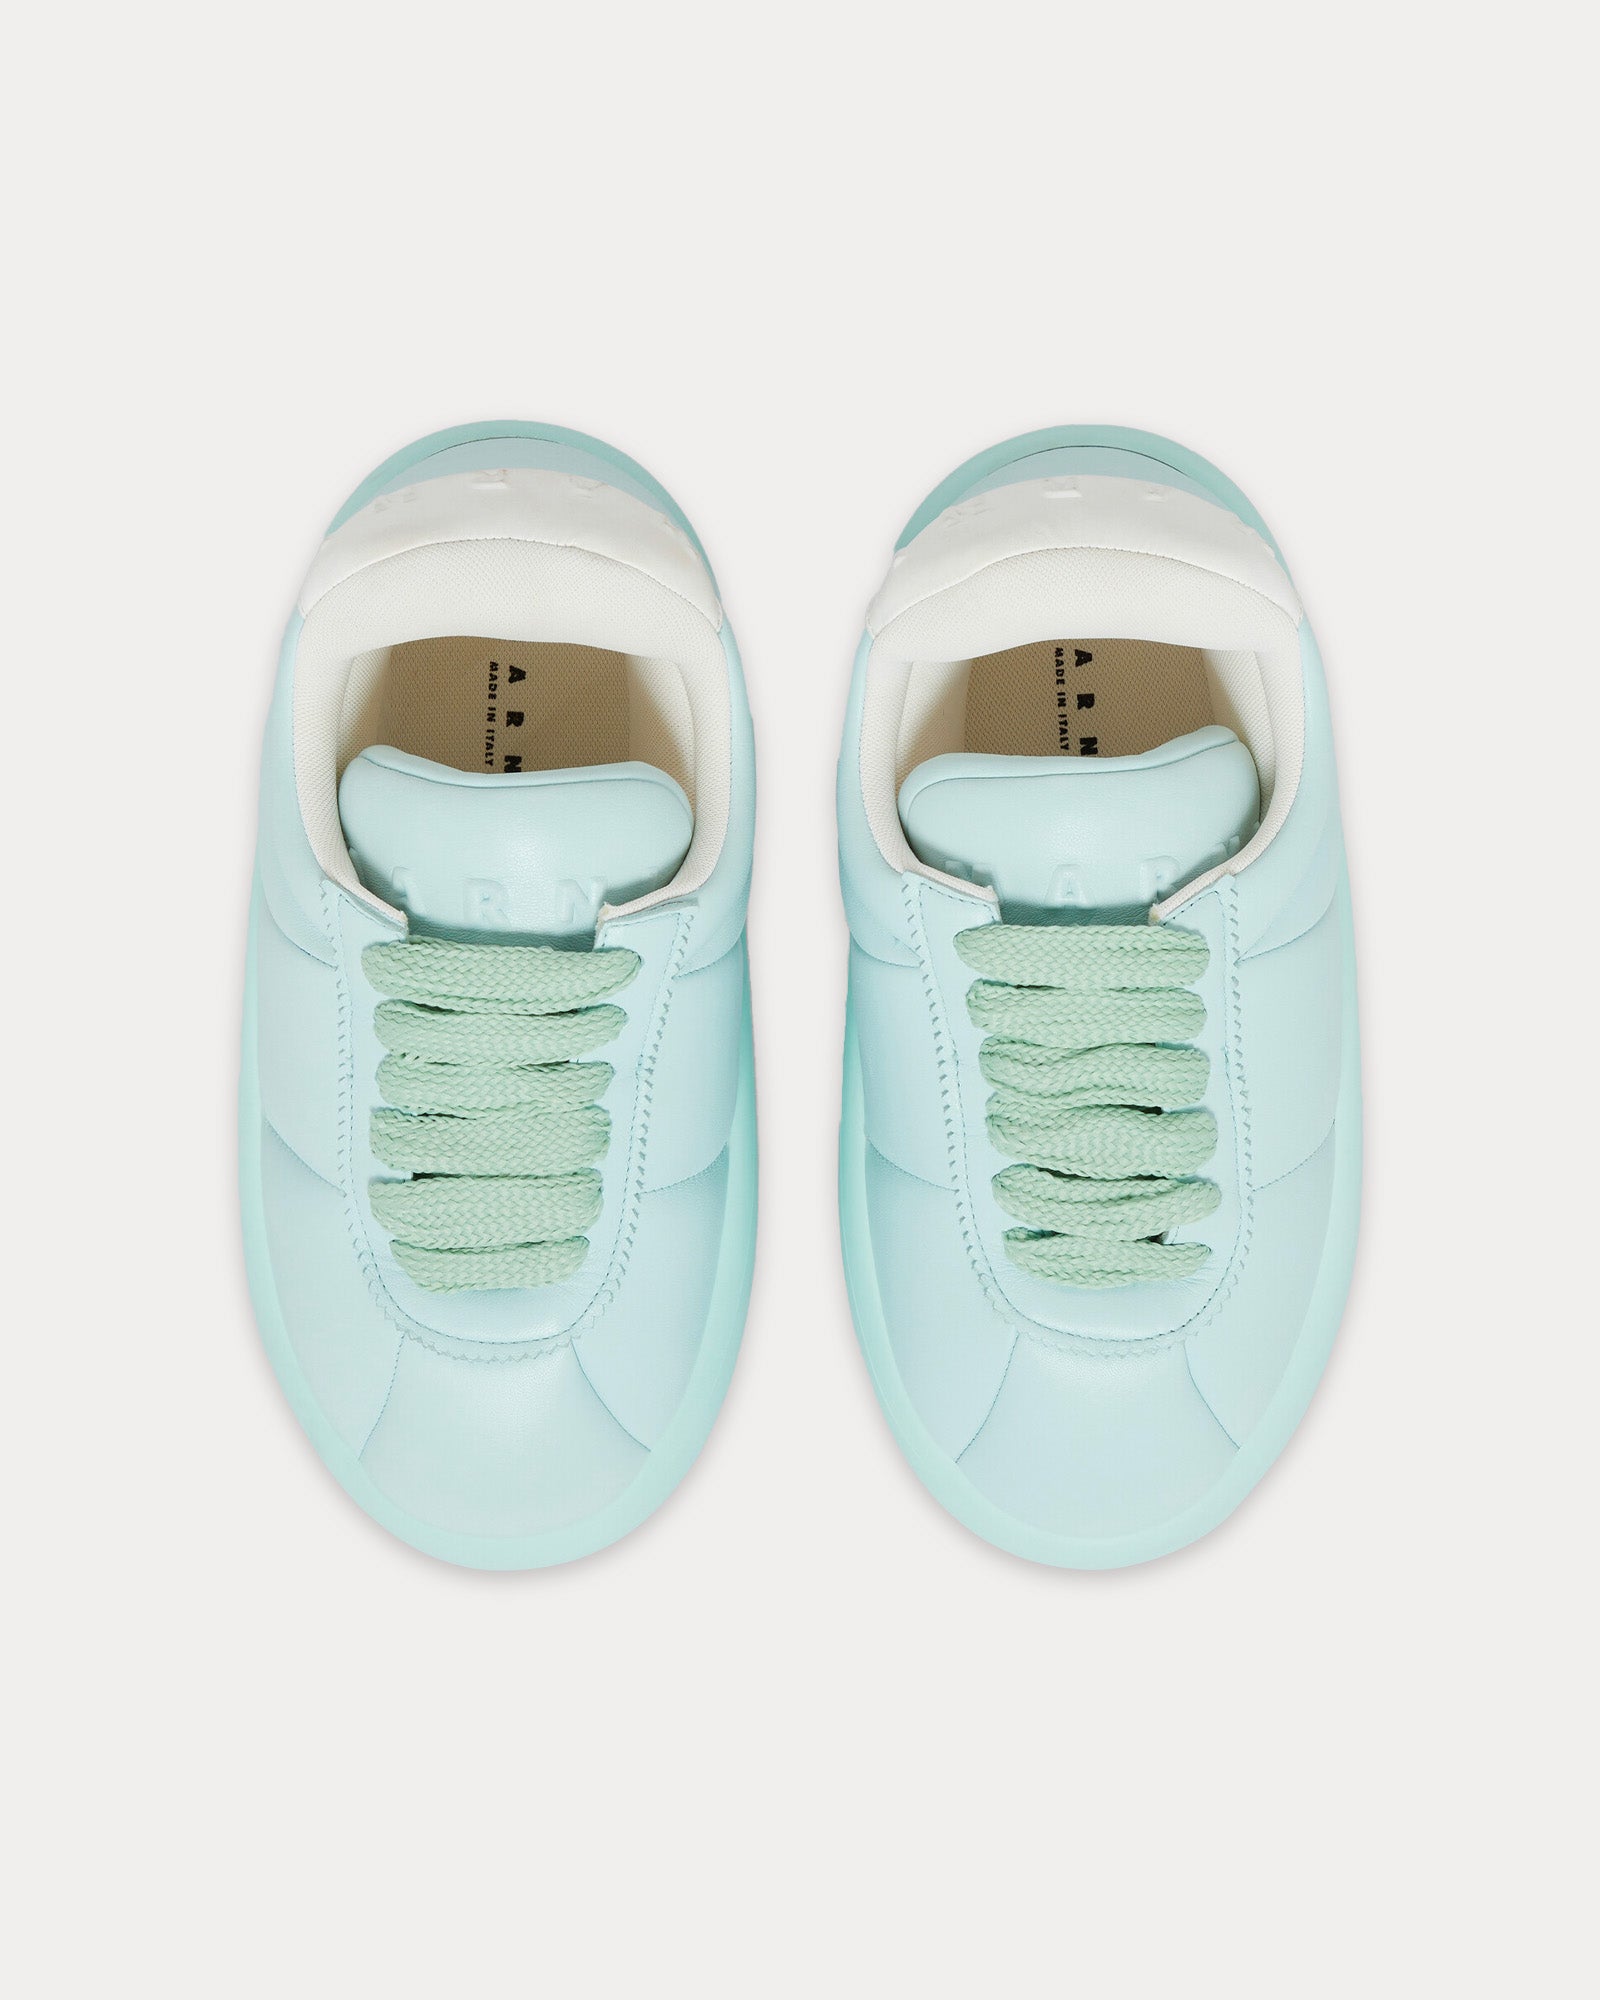 Marni - Bigfoot 2.0 Leather Light Blue Low Top Sneakers